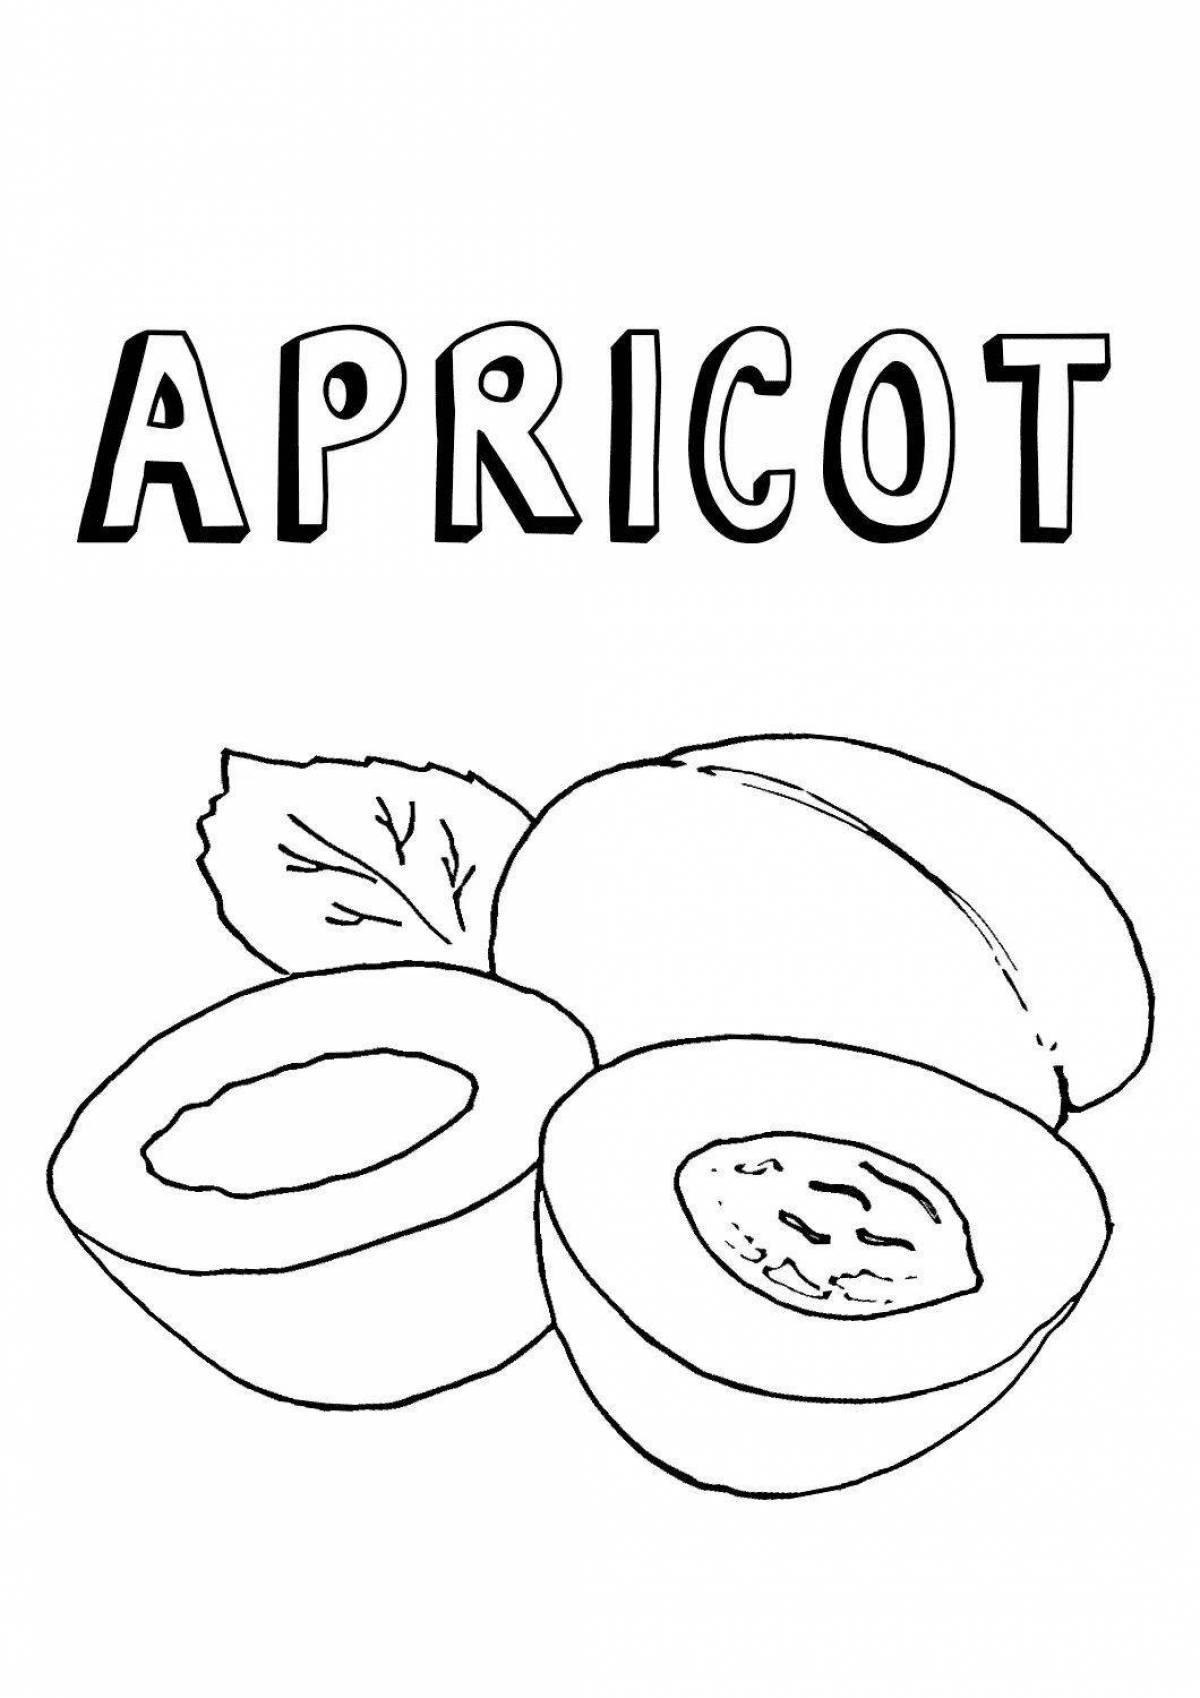 Cute apricot coloring book for kids